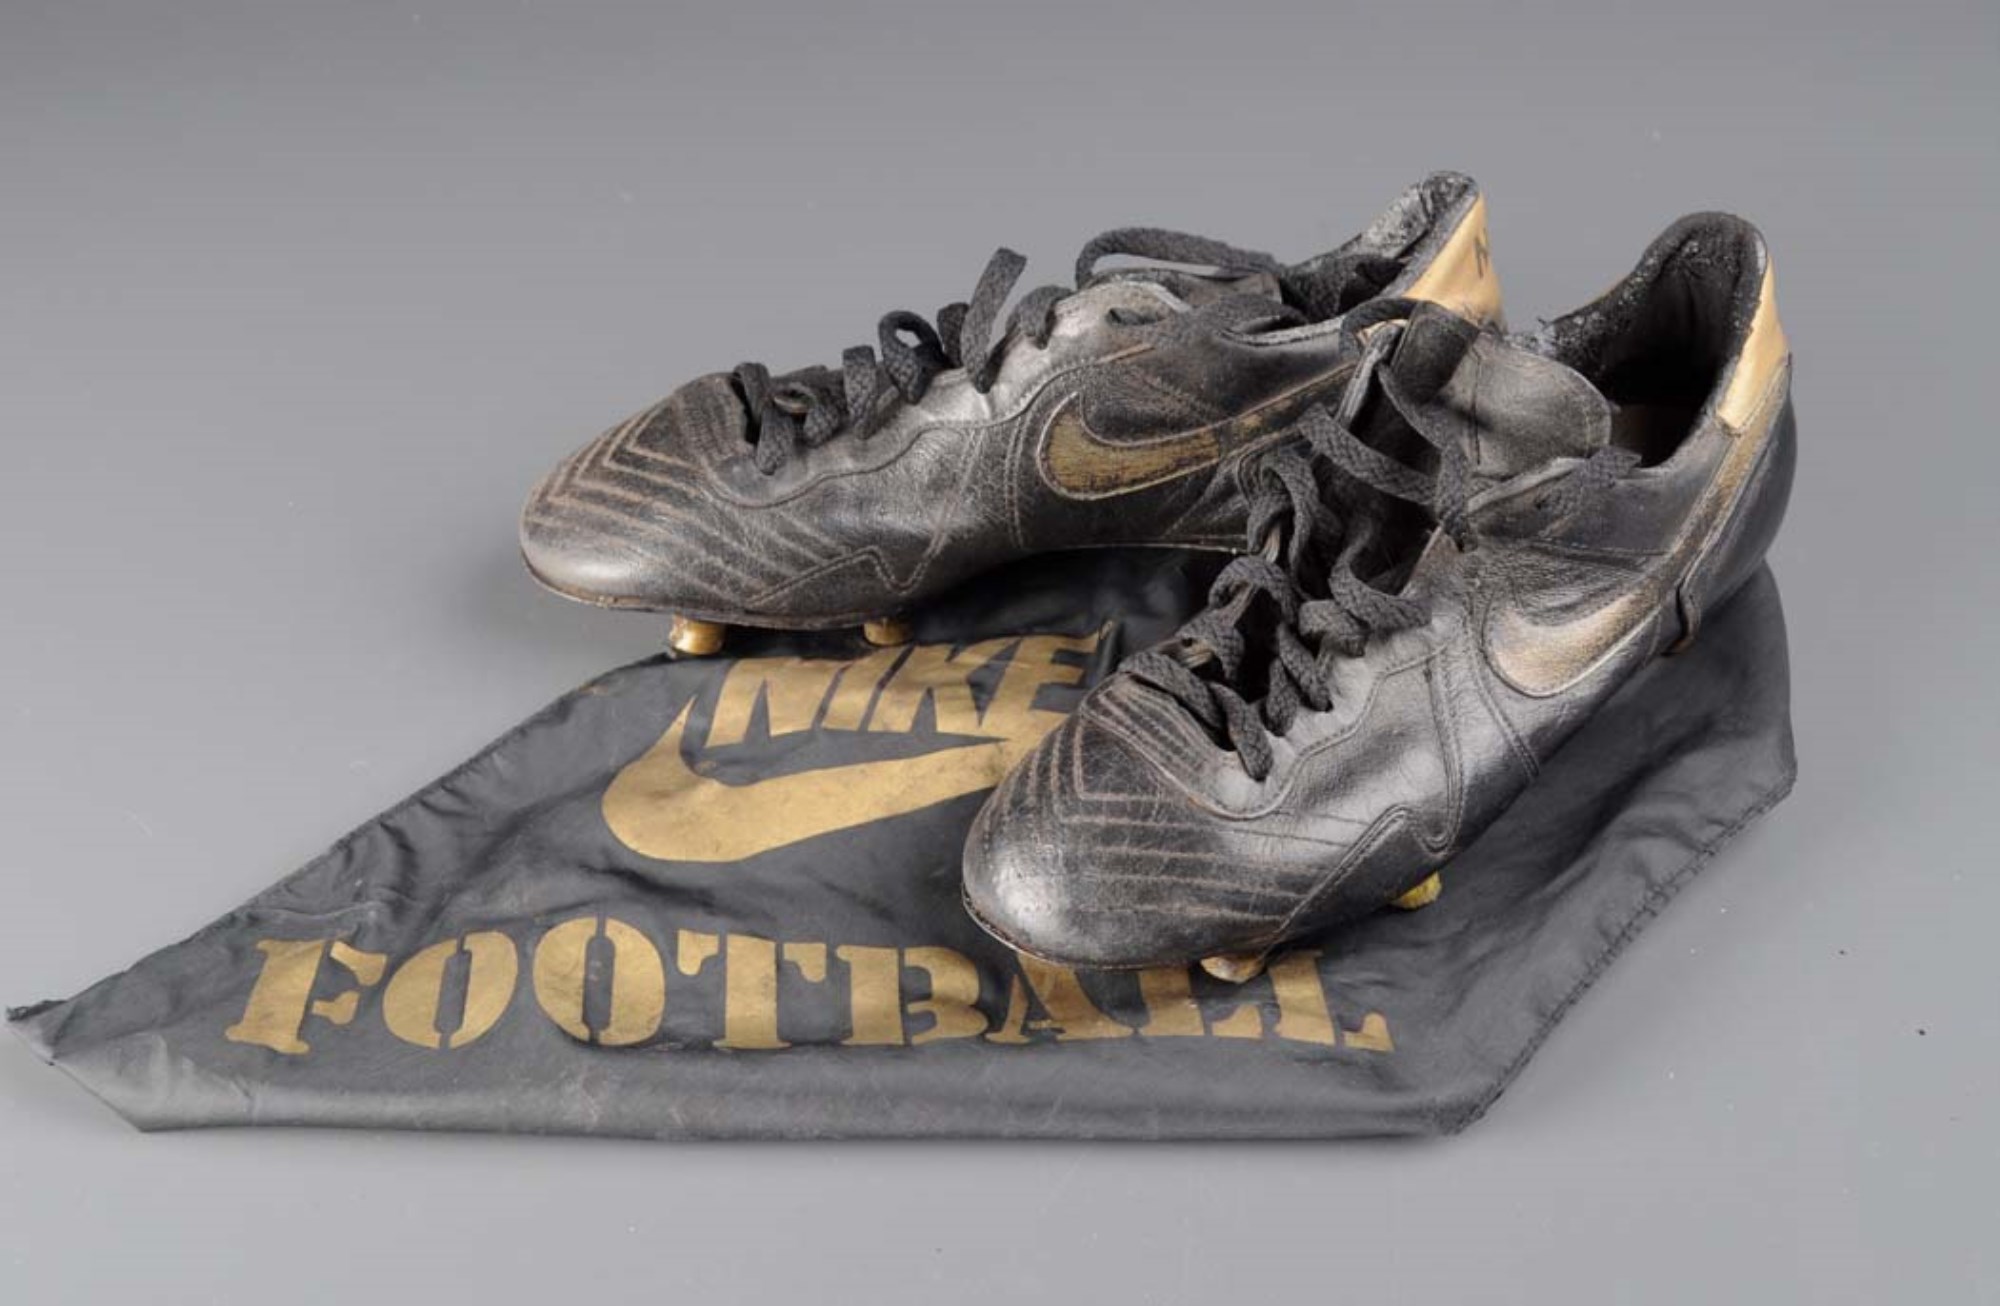 Lot 386 - A pair of Nike football boots owned by Terry